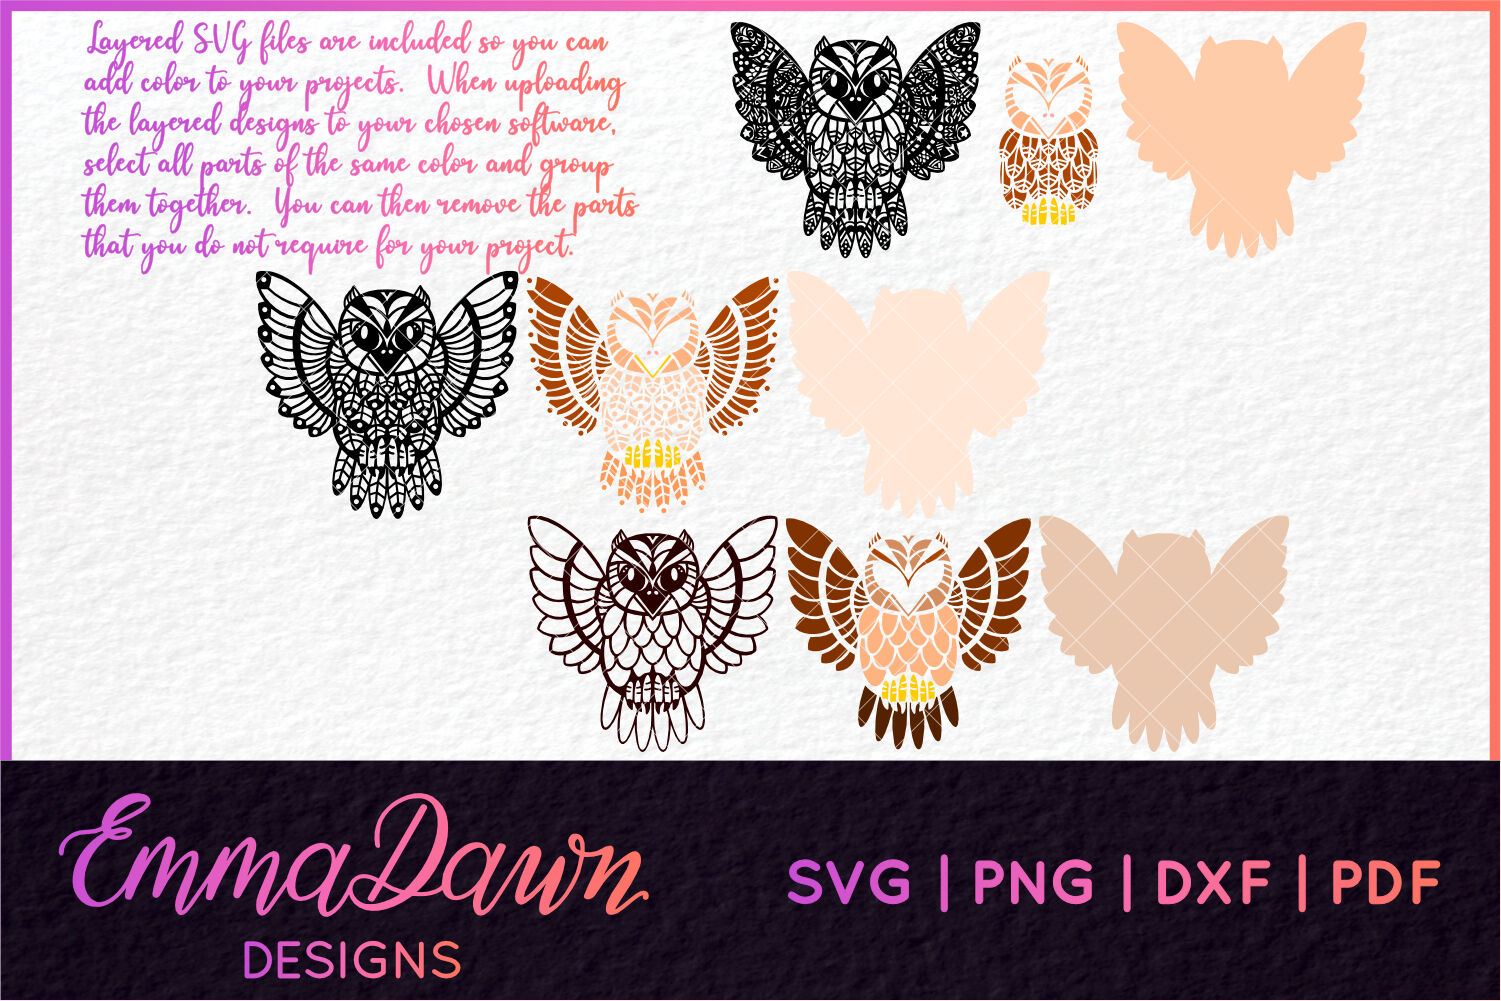 Download Olly The Owl Mandala Zentangle 2 Designs Svg Dxf Png By Emma Dawn Designs Thehungryjpeg Com